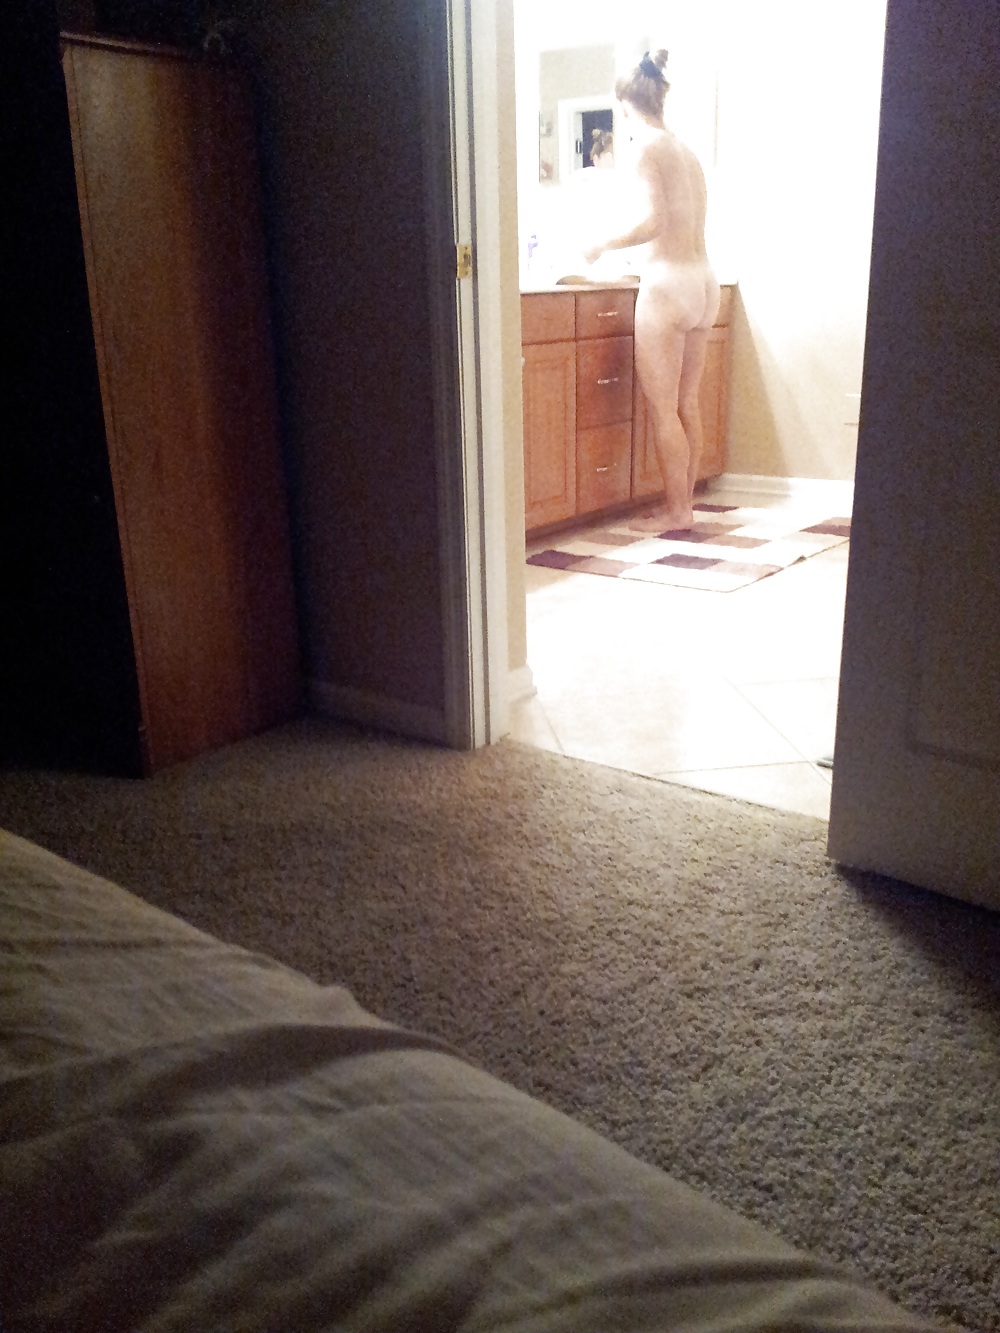 My wife out of the shower #16512336